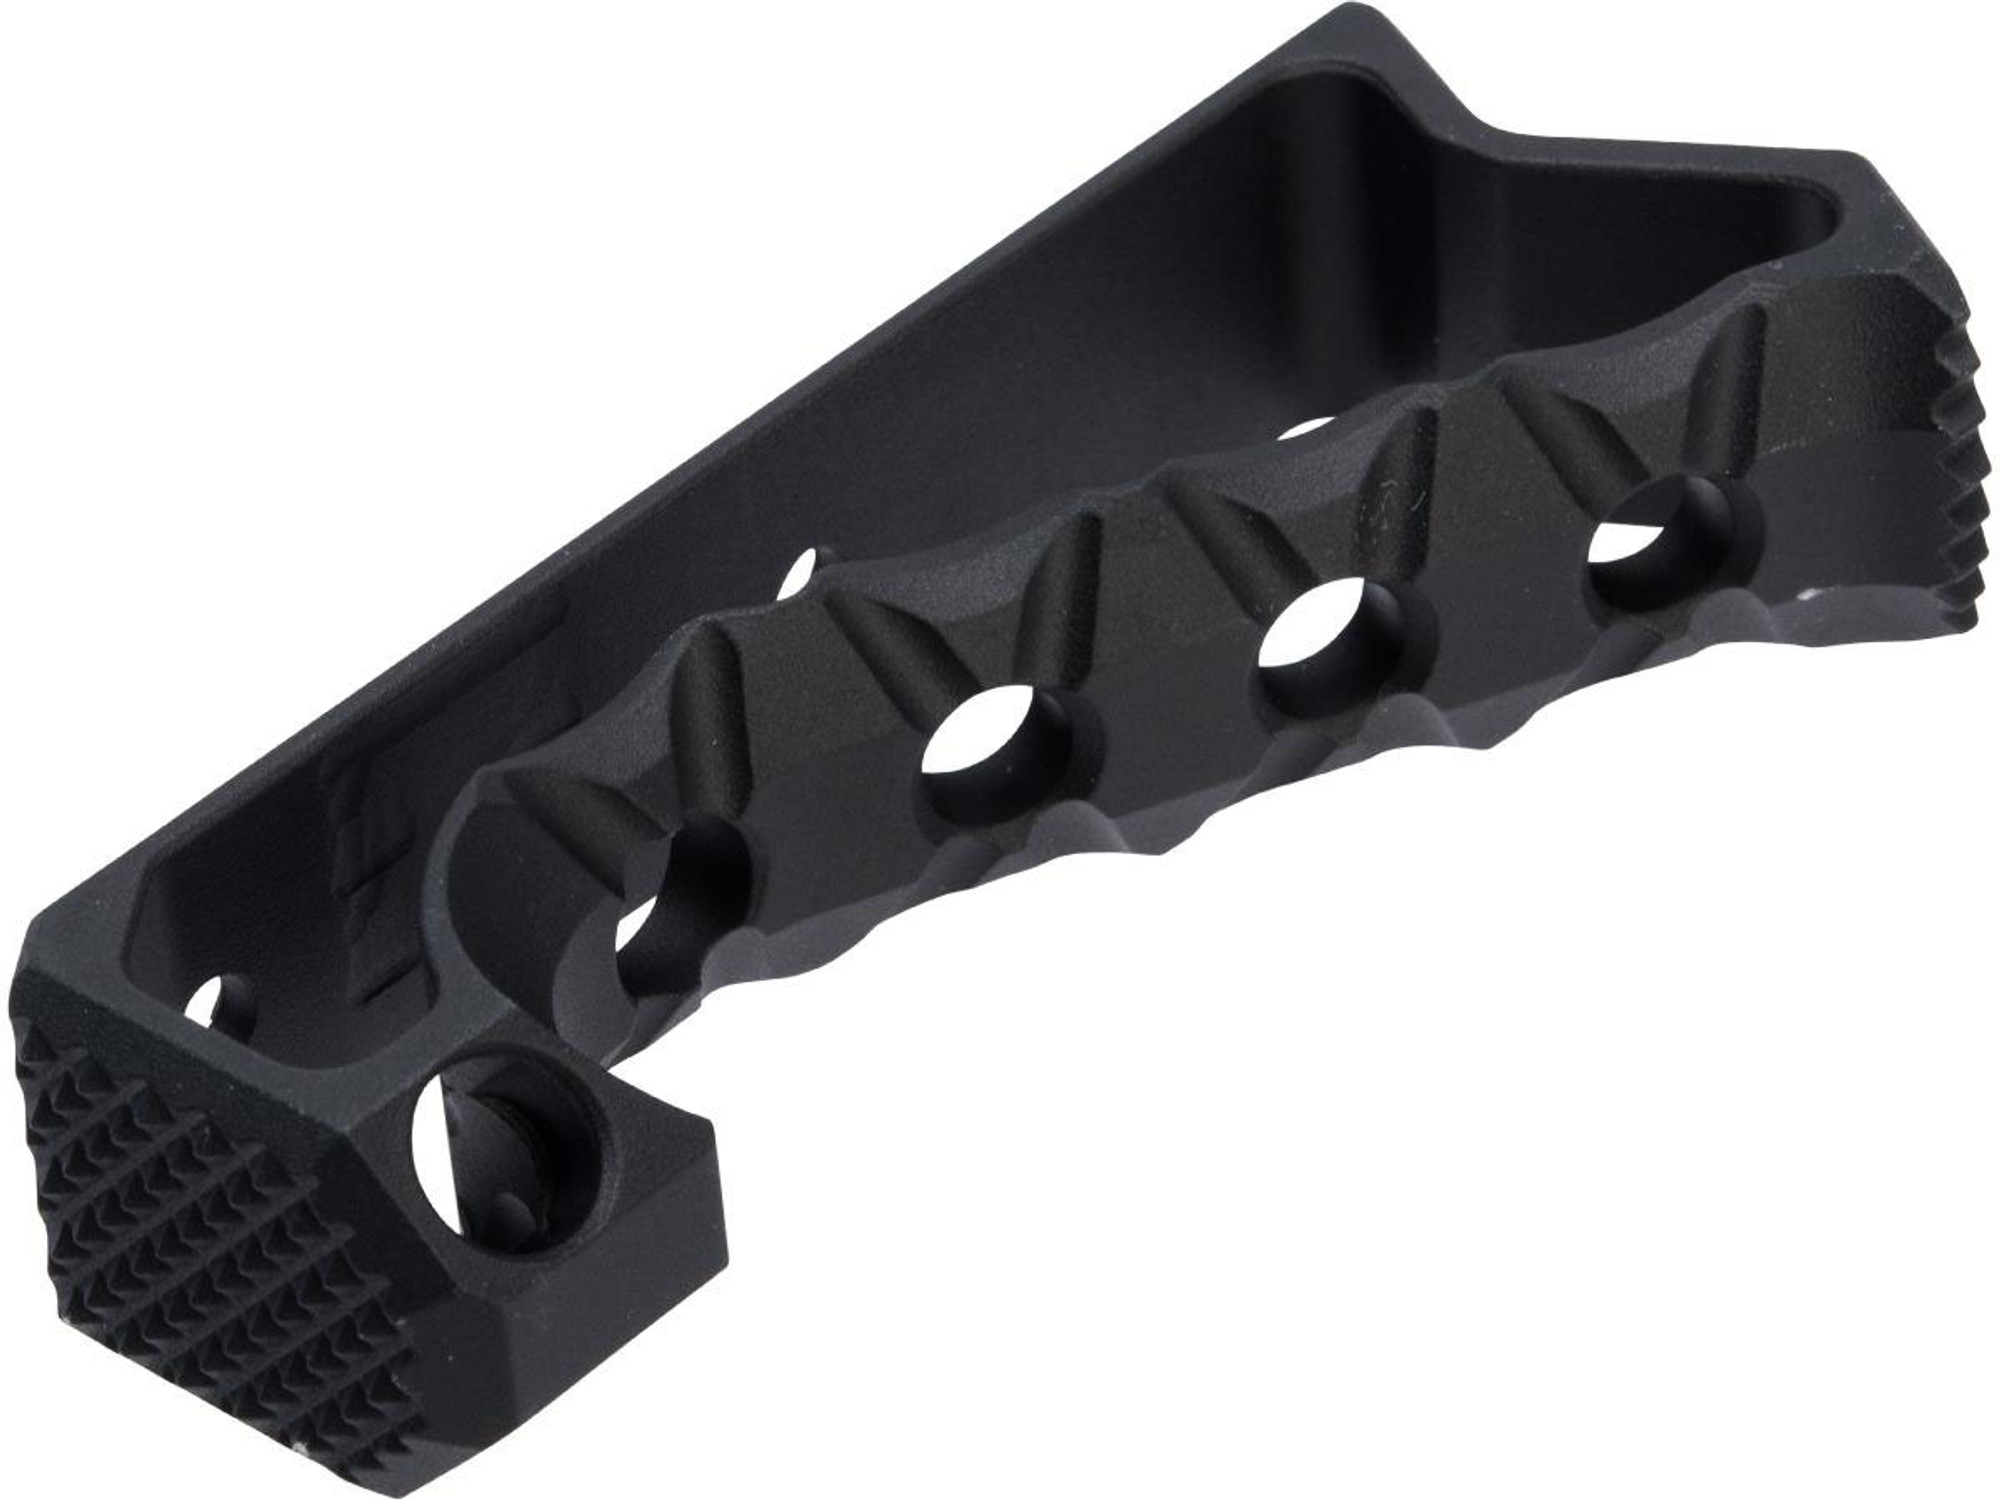 F-1 Firearms Aluminum Skeletonized M-LOK Foregrip (Type: Black / Non-Paracord Wrapped)